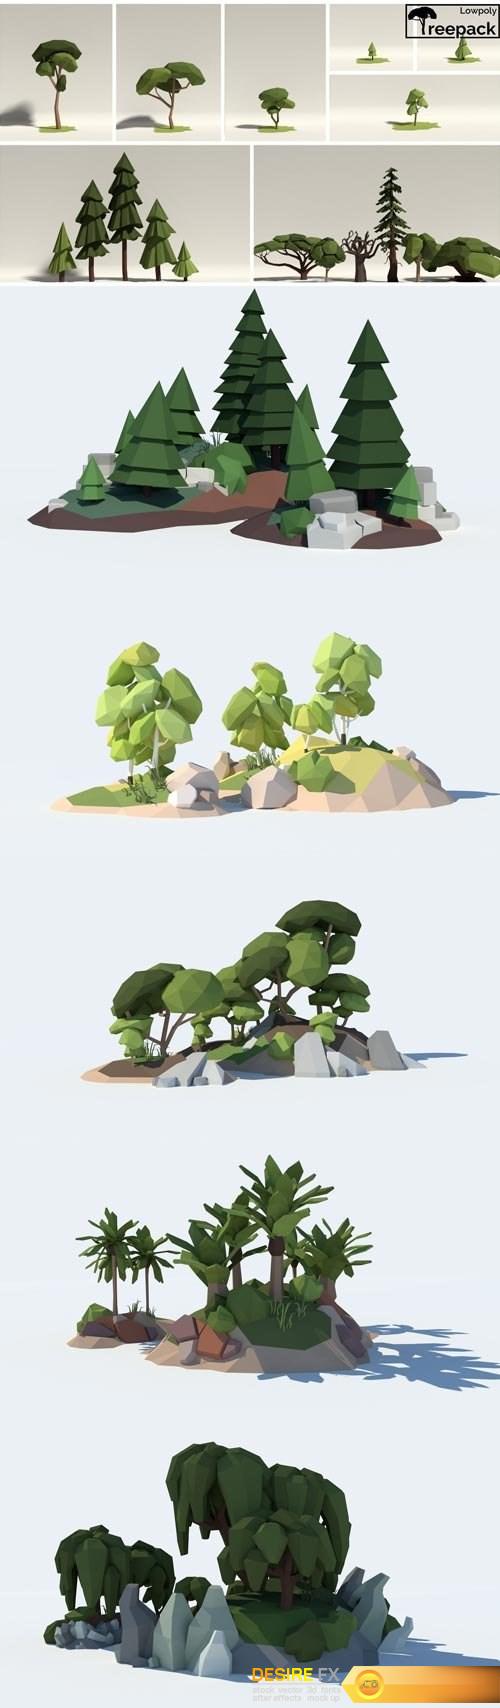 CgTrader - Low Poly Tree Pack